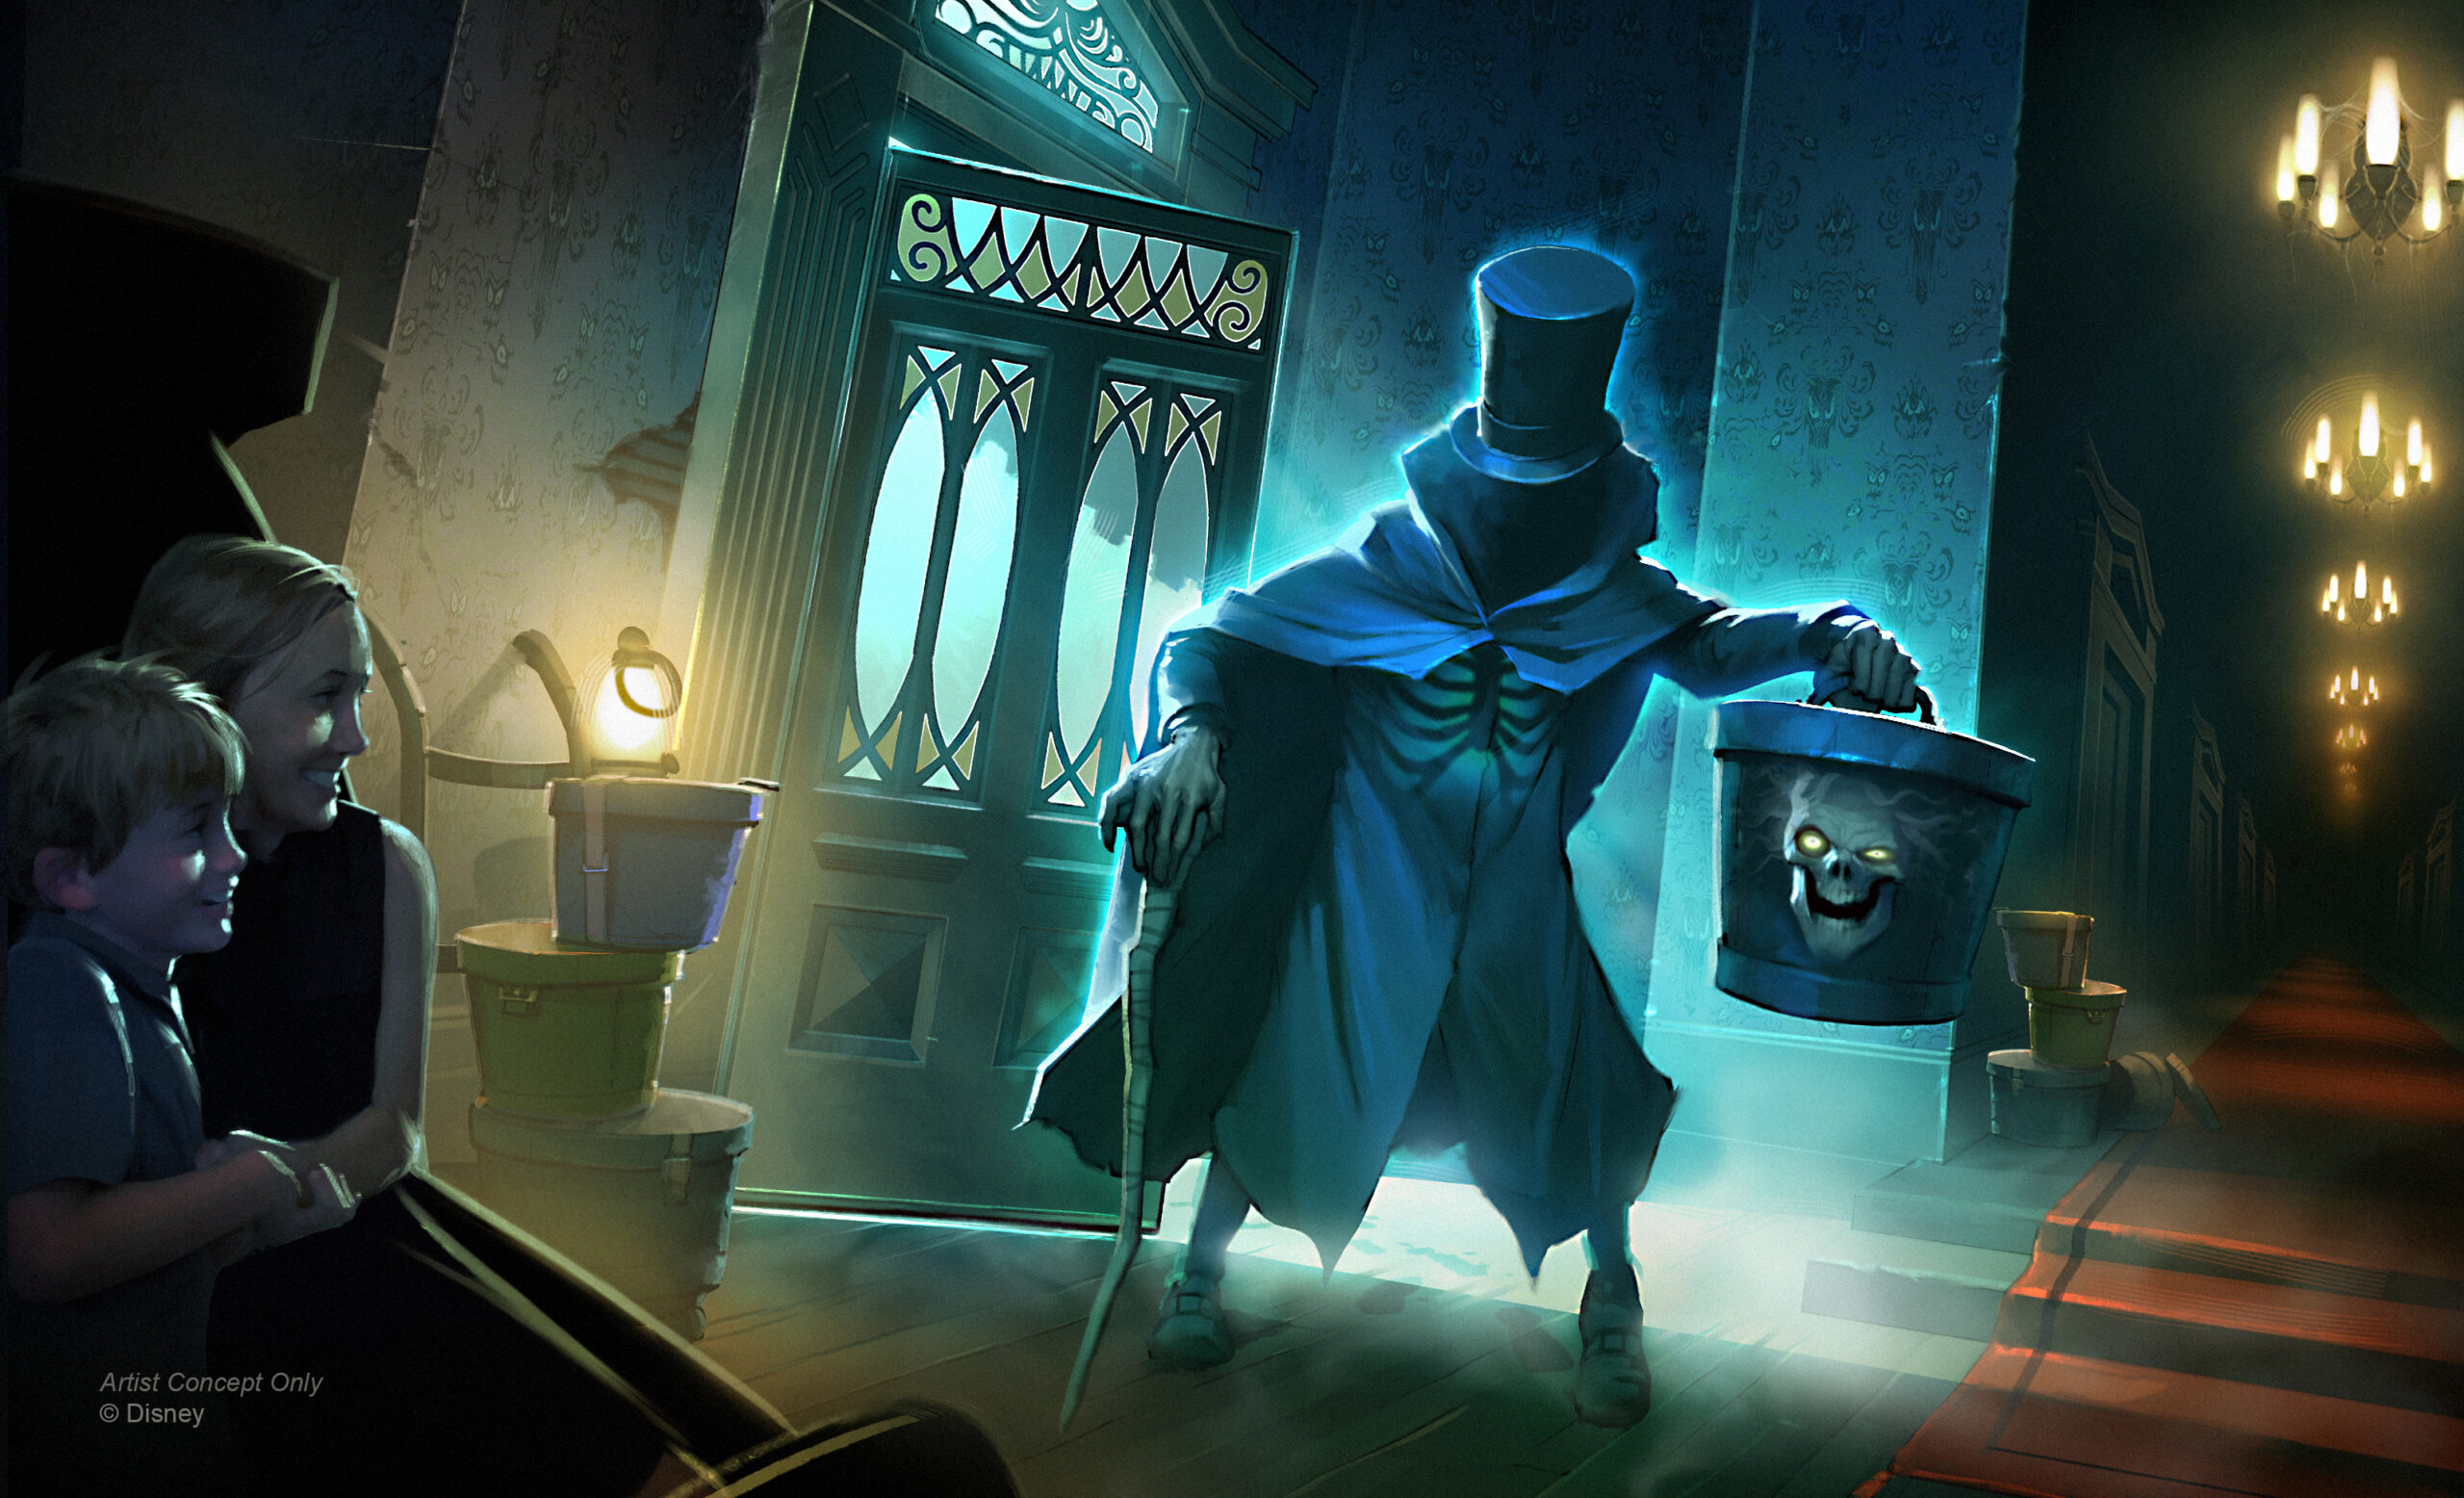 Hatbox Ghost is coming to the Haunted Mansion attraction in Florida in late November!